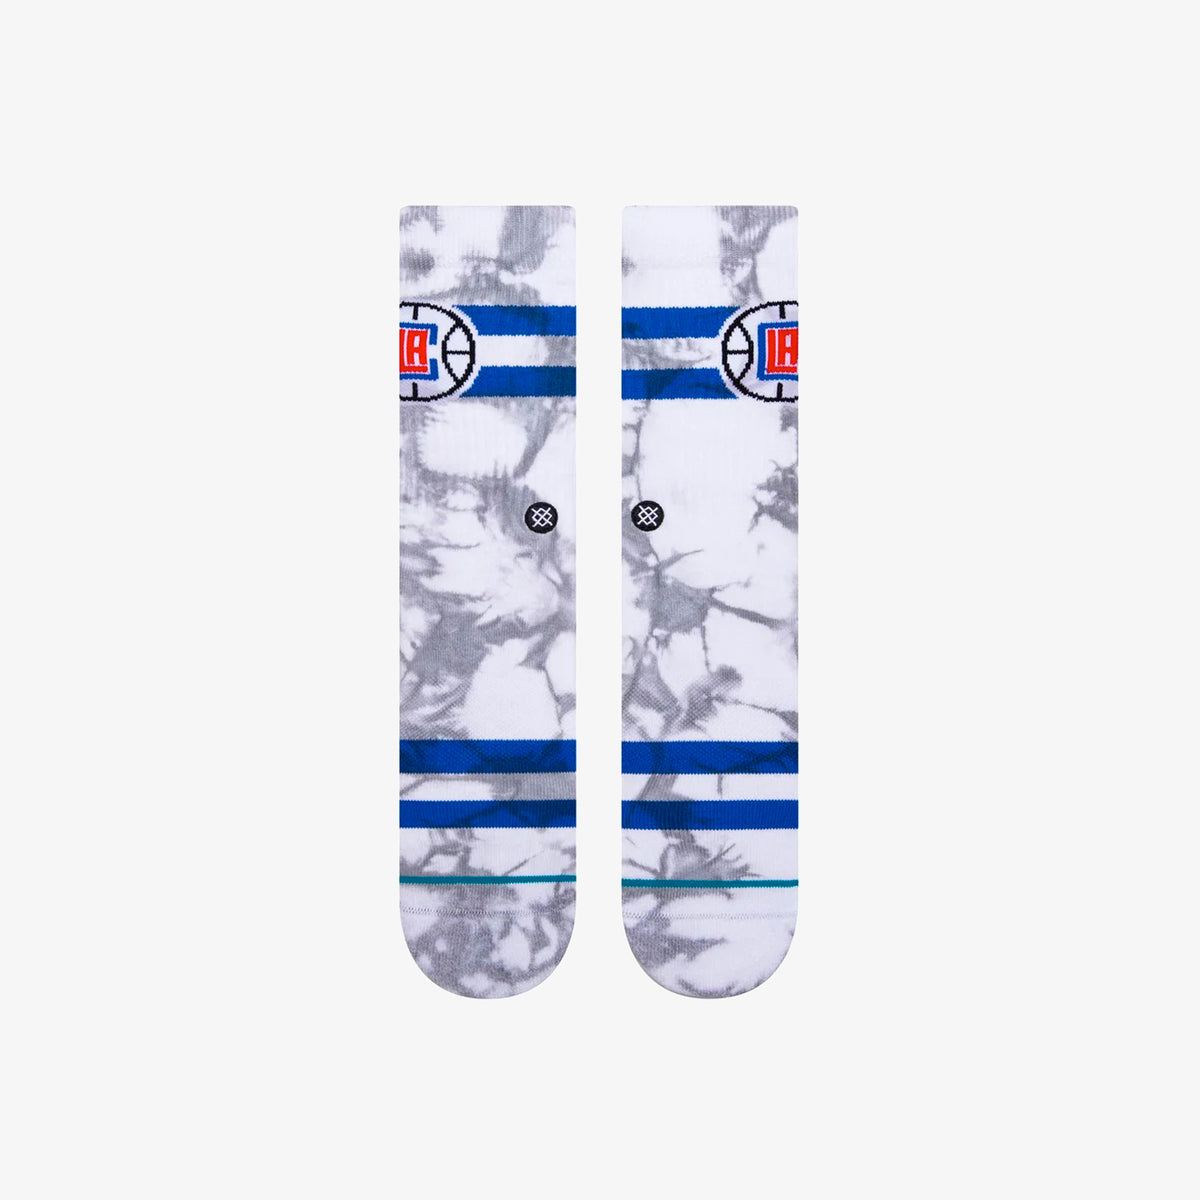 Los Angeles Clippers Dyed Socks